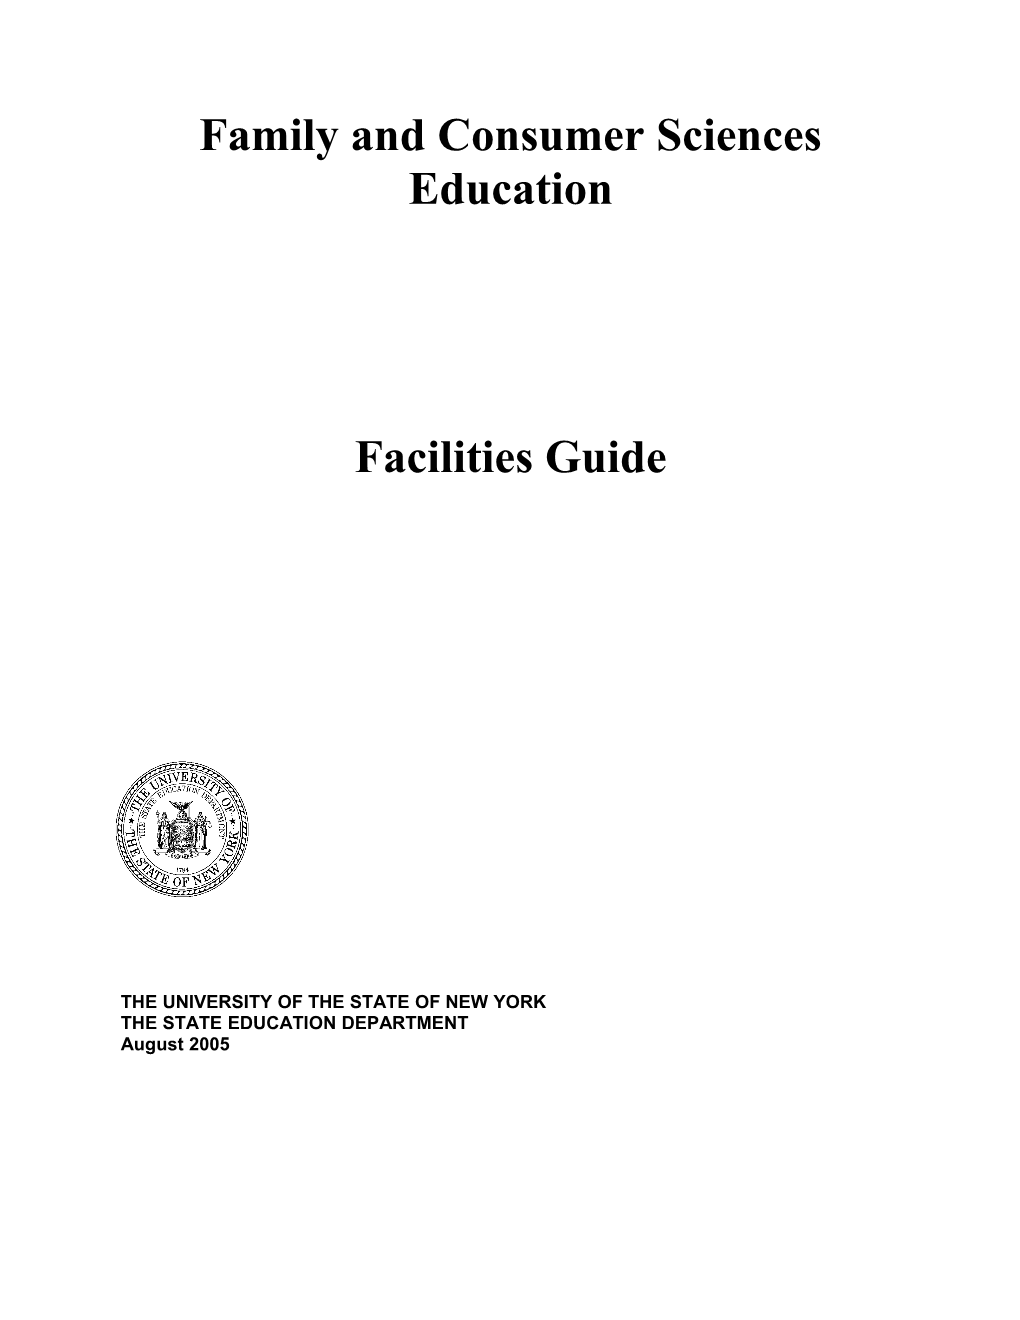 Family and Consumer Sciences Education Facilities Guide